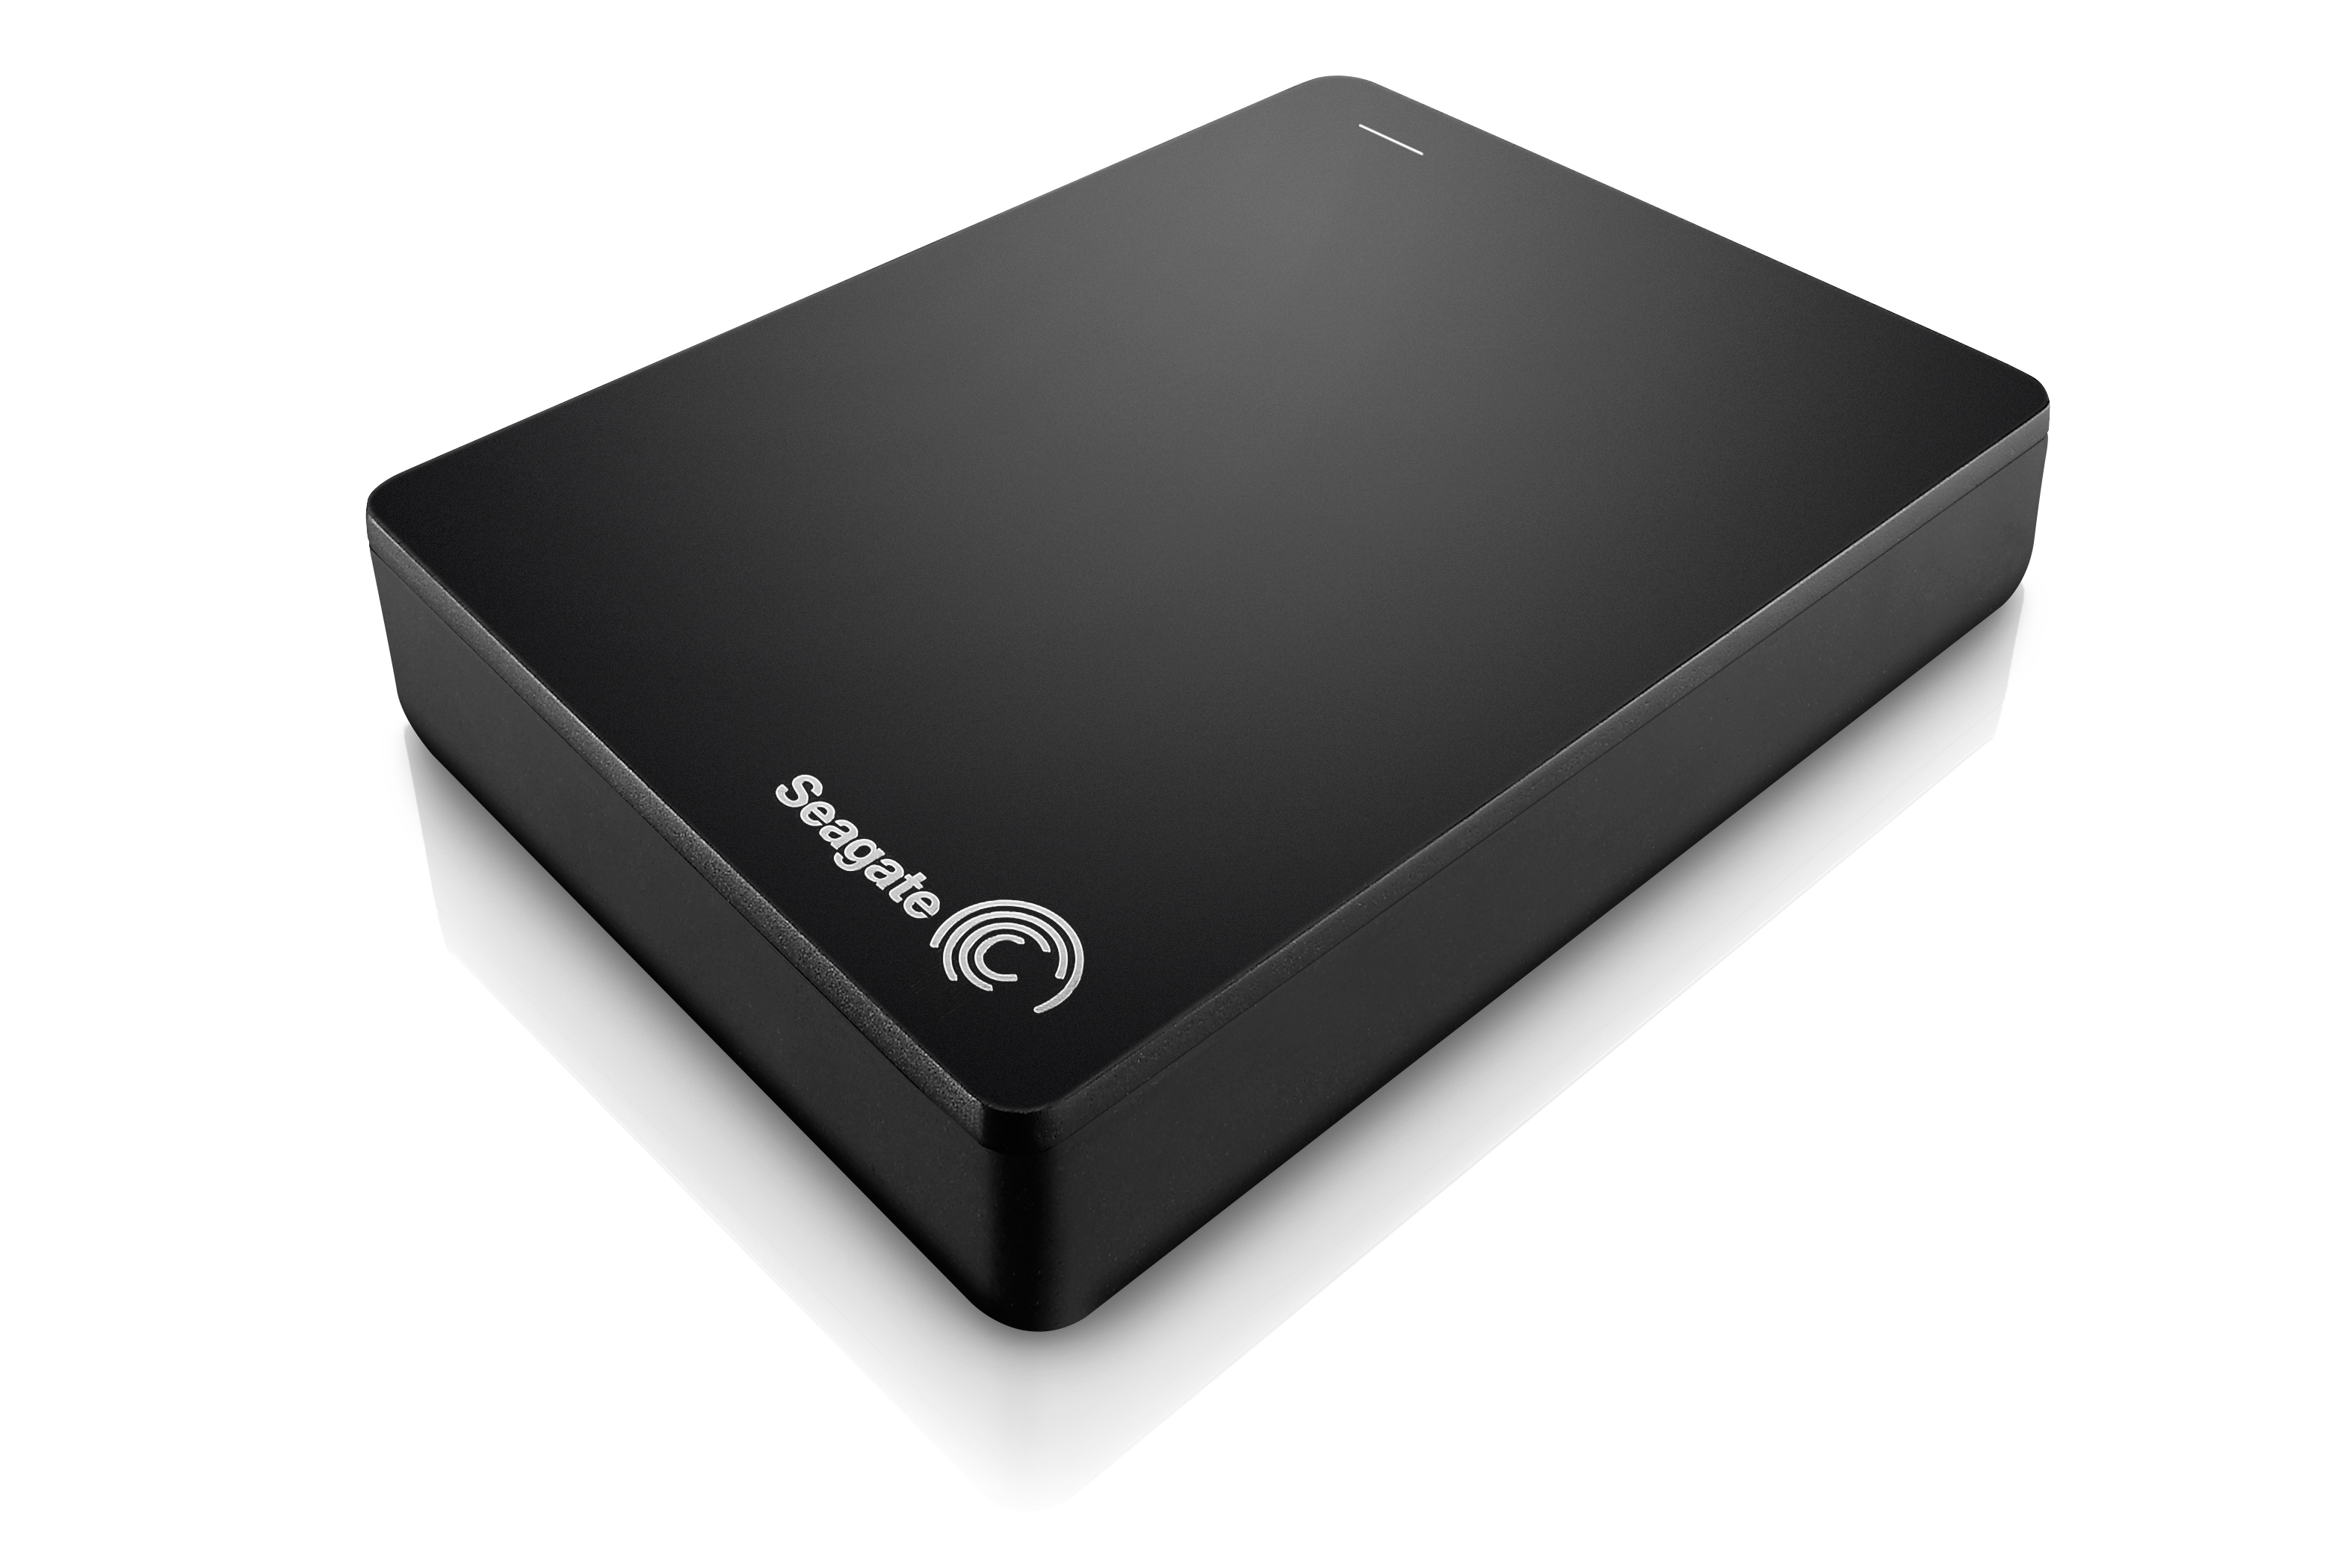 best ssd external hard drive for pc music back up